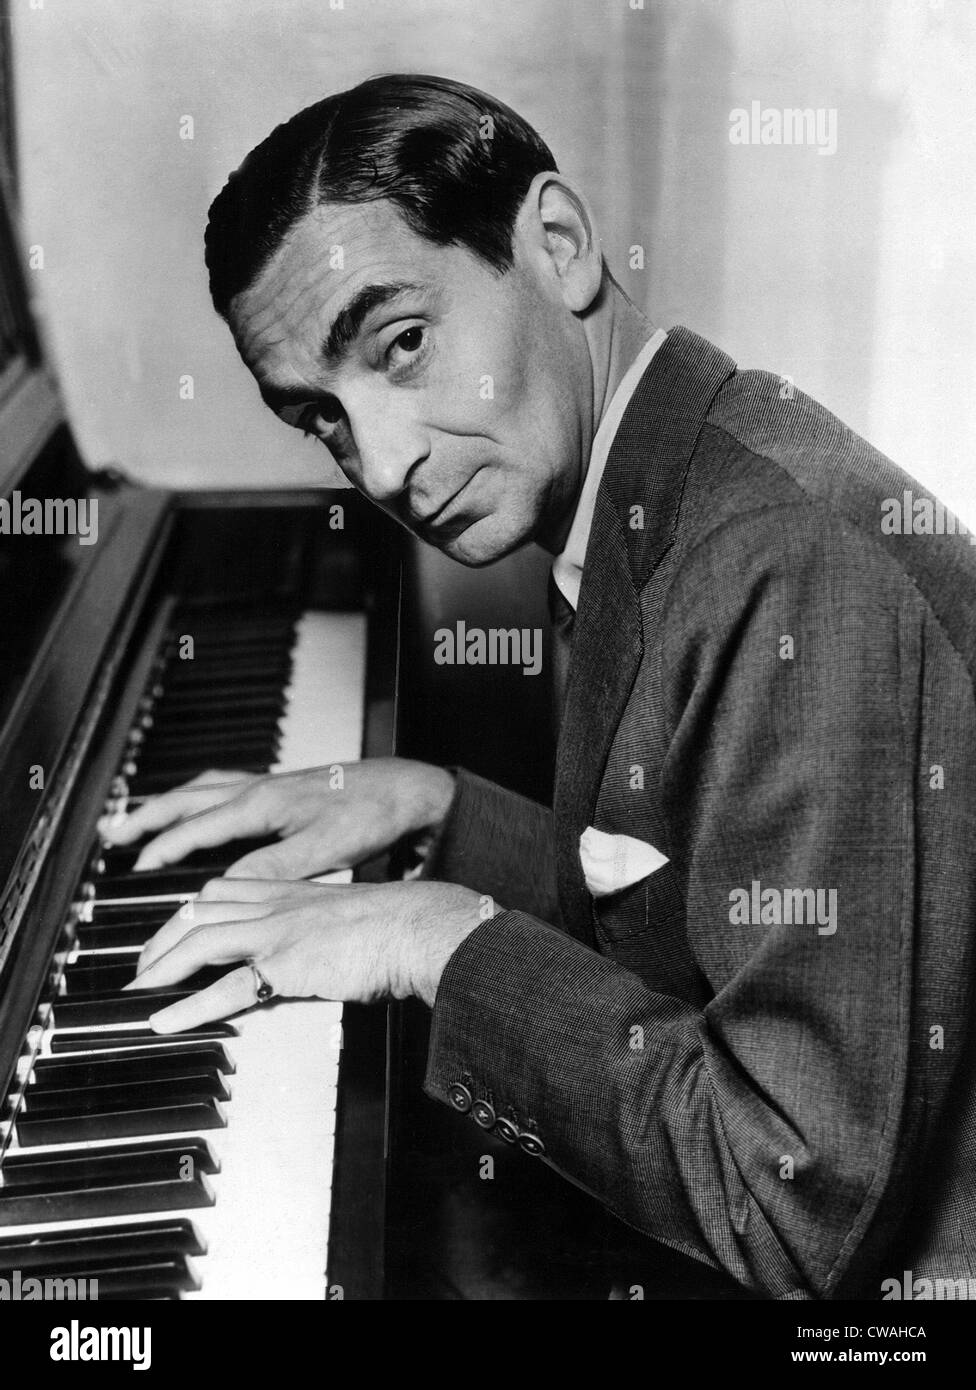 Irving Berlin at the piano, 1940s. Courtesy: CSU Archives / Everett Collection Stock Photo